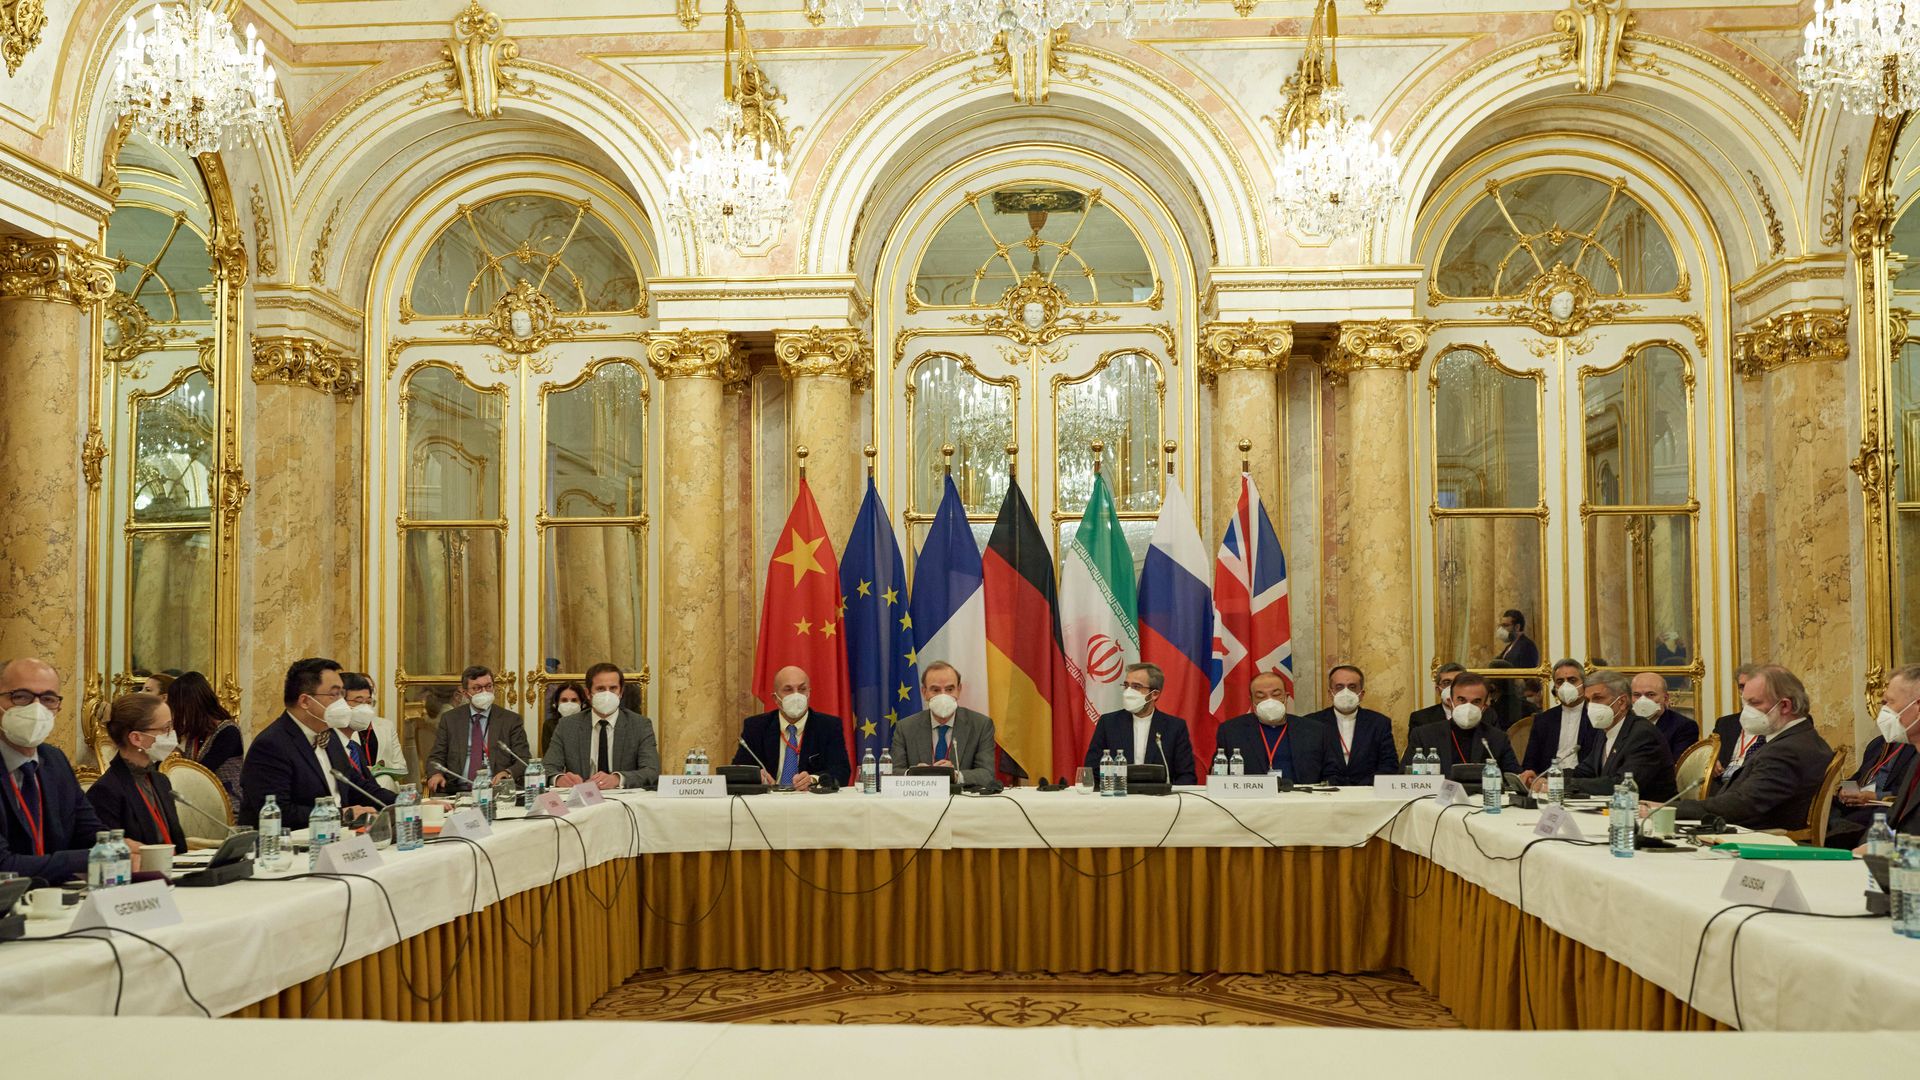 Officials are seen sitting in a Vienna meeting room during the first day of the latest round of nuclear talks with Iran.